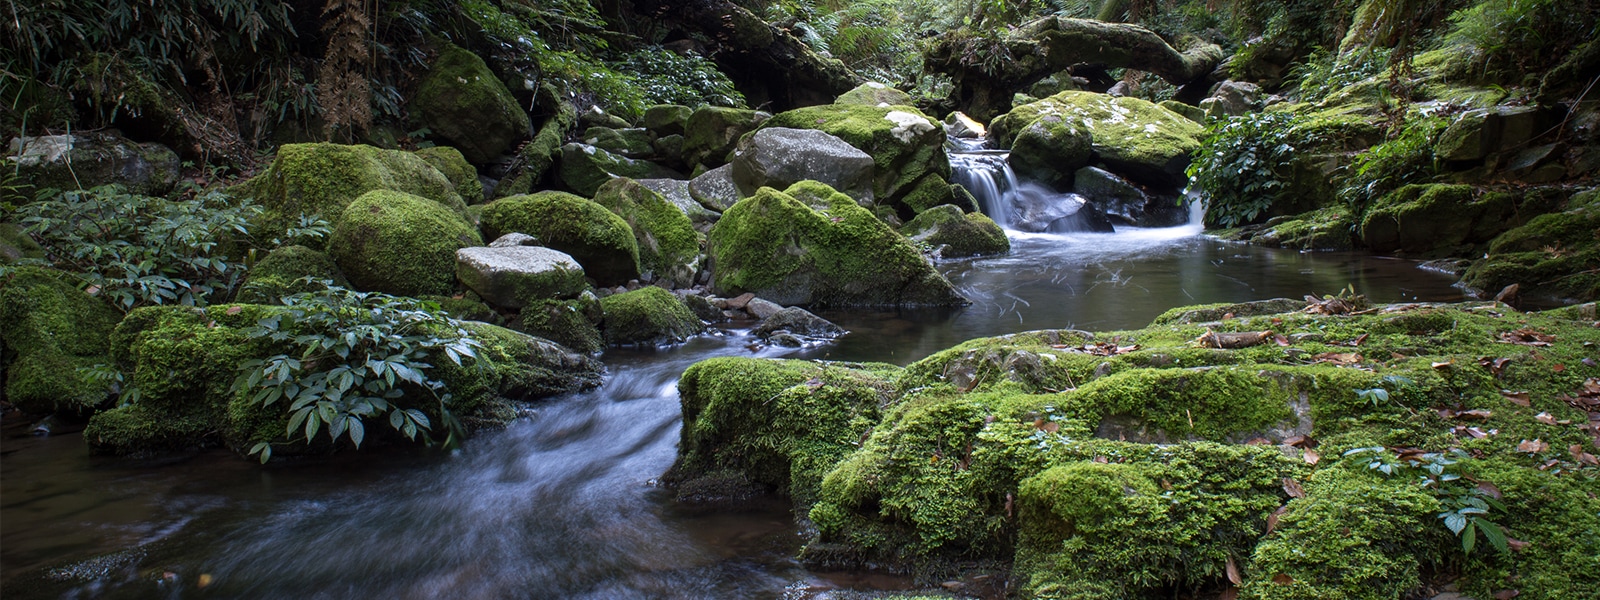 Scenic view of stream flowing through rocks in forest.